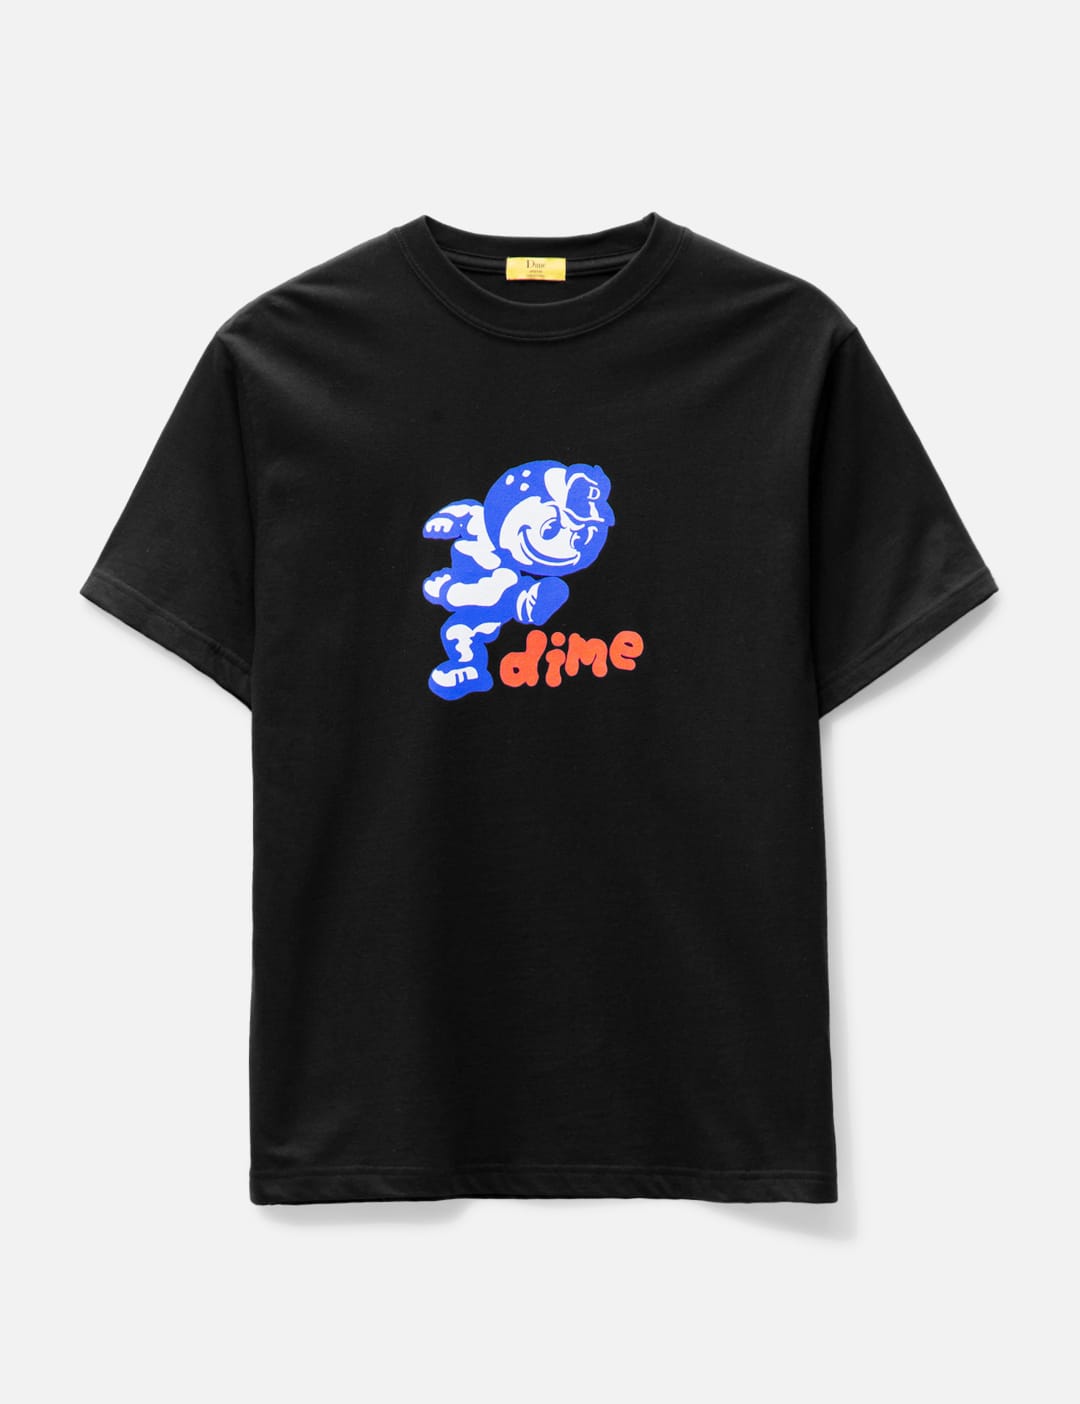 Dime   Ballboy T Shirt   HBX   Globally Curated Fashion and